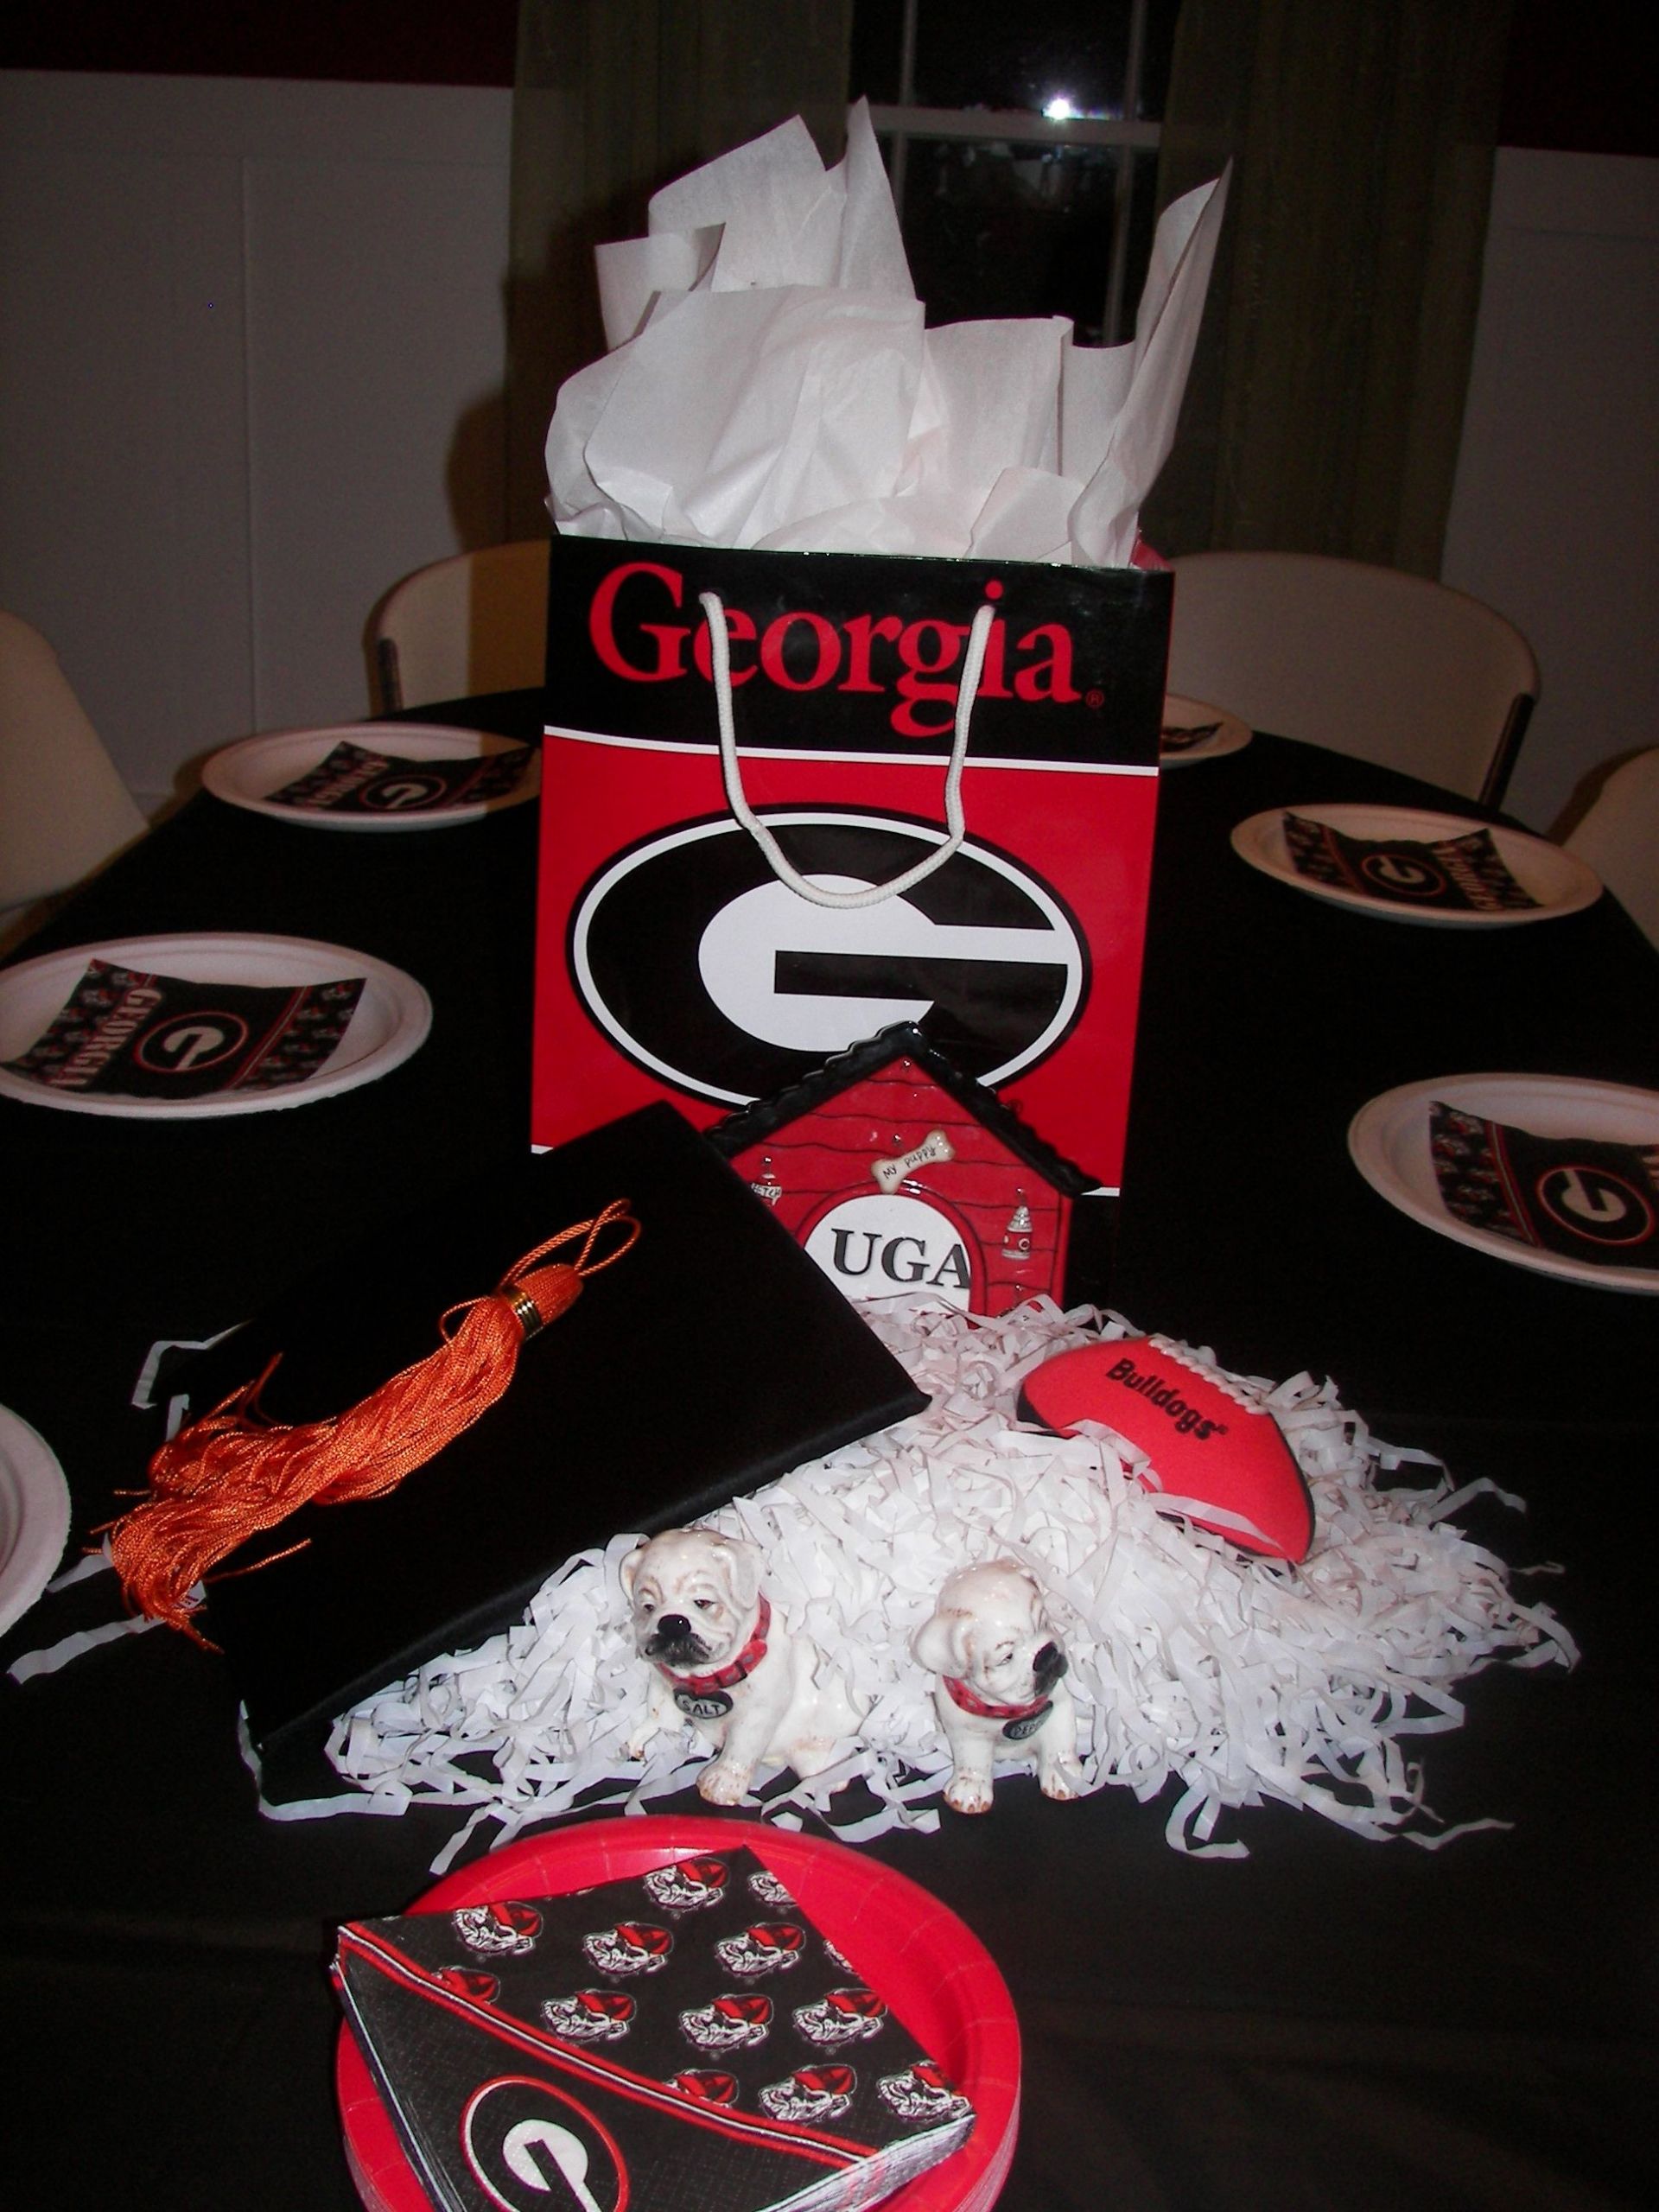 Uga Graduation Party Ideas
 Used a Georgia t bag for the centerpiece for my son s